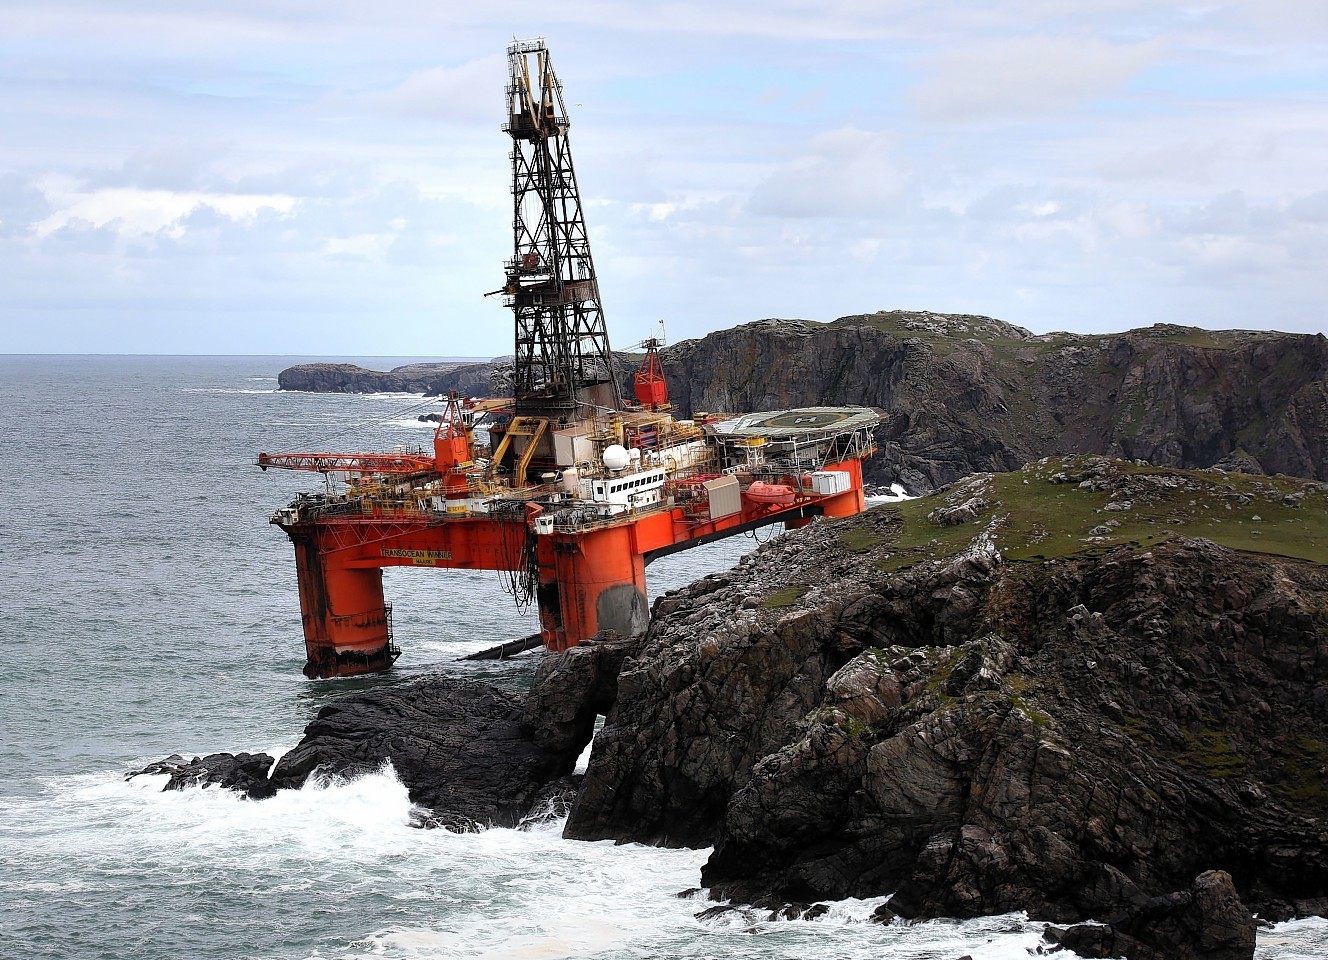 The Transocean Winner oil rig was on the rocks at Dalmore beach, near Carloway